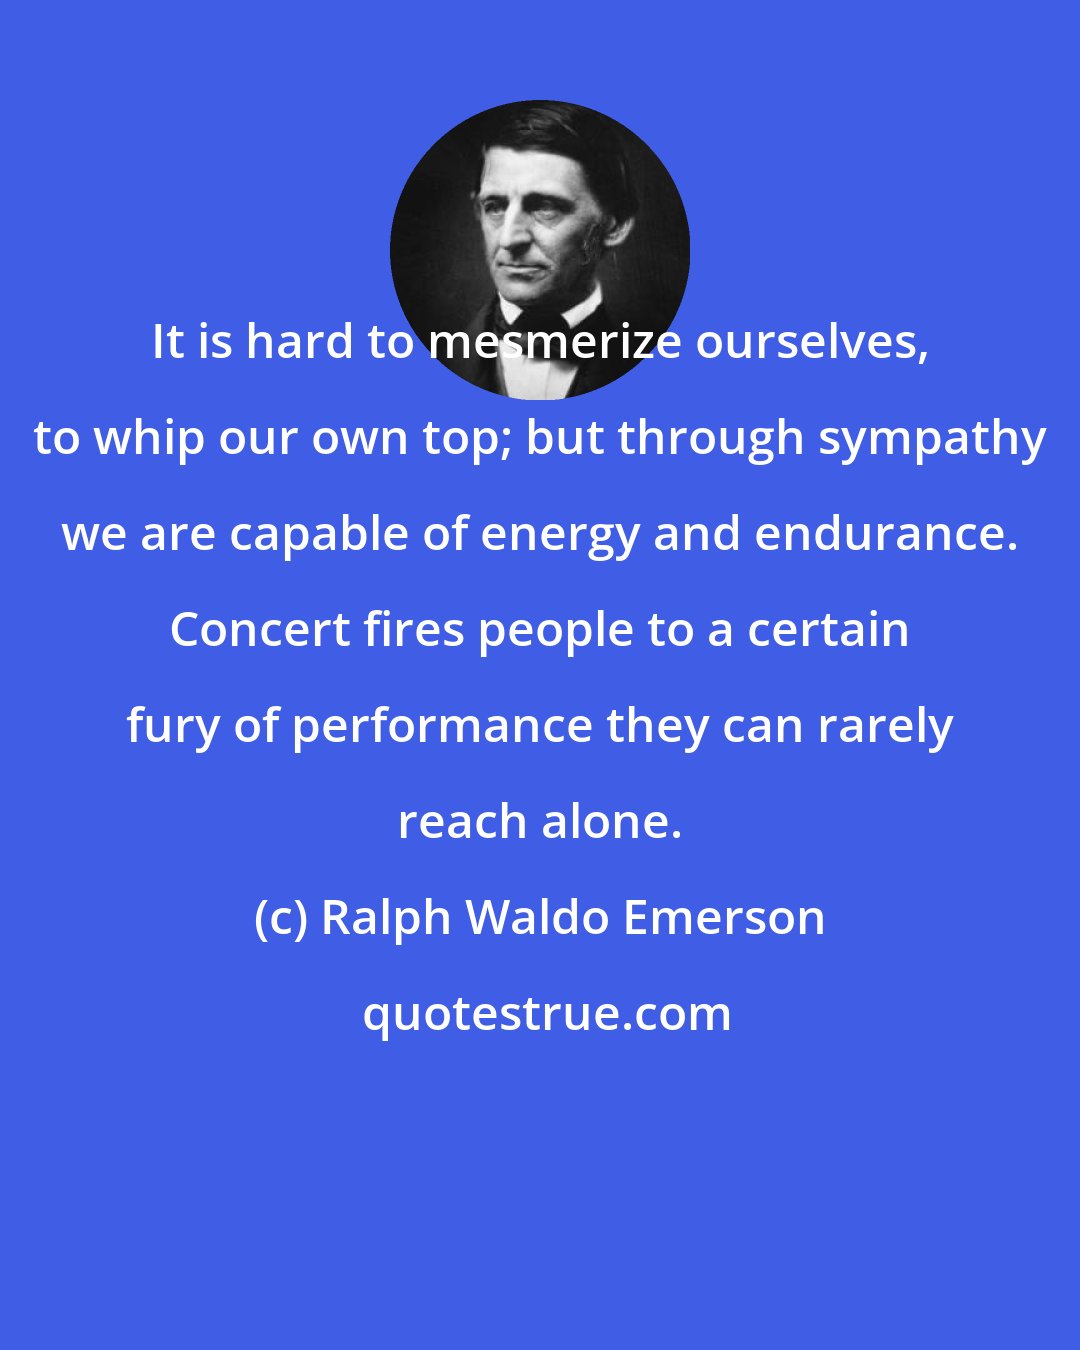 Ralph Waldo Emerson: It is hard to mesmerize ourselves, to whip our own top; but through sympathy we are capable of energy and endurance. Concert fires people to a certain fury of performance they can rarely reach alone.